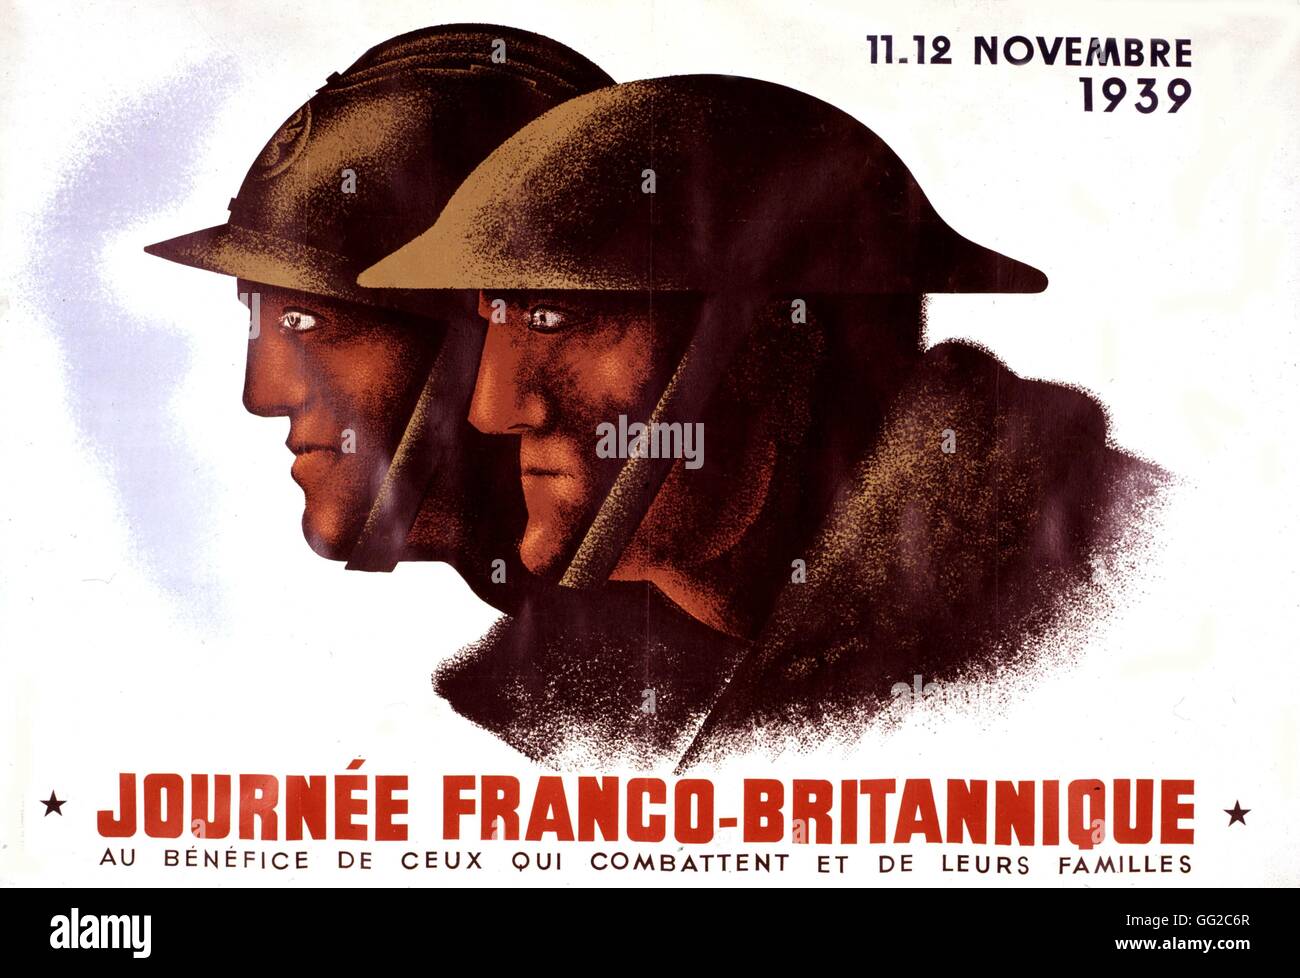 Poster published on the French-British Day, in aid of the combatants and their families November 11-12, 1939 France - World War II Paris. Bibliothèque nationale Stock Photo